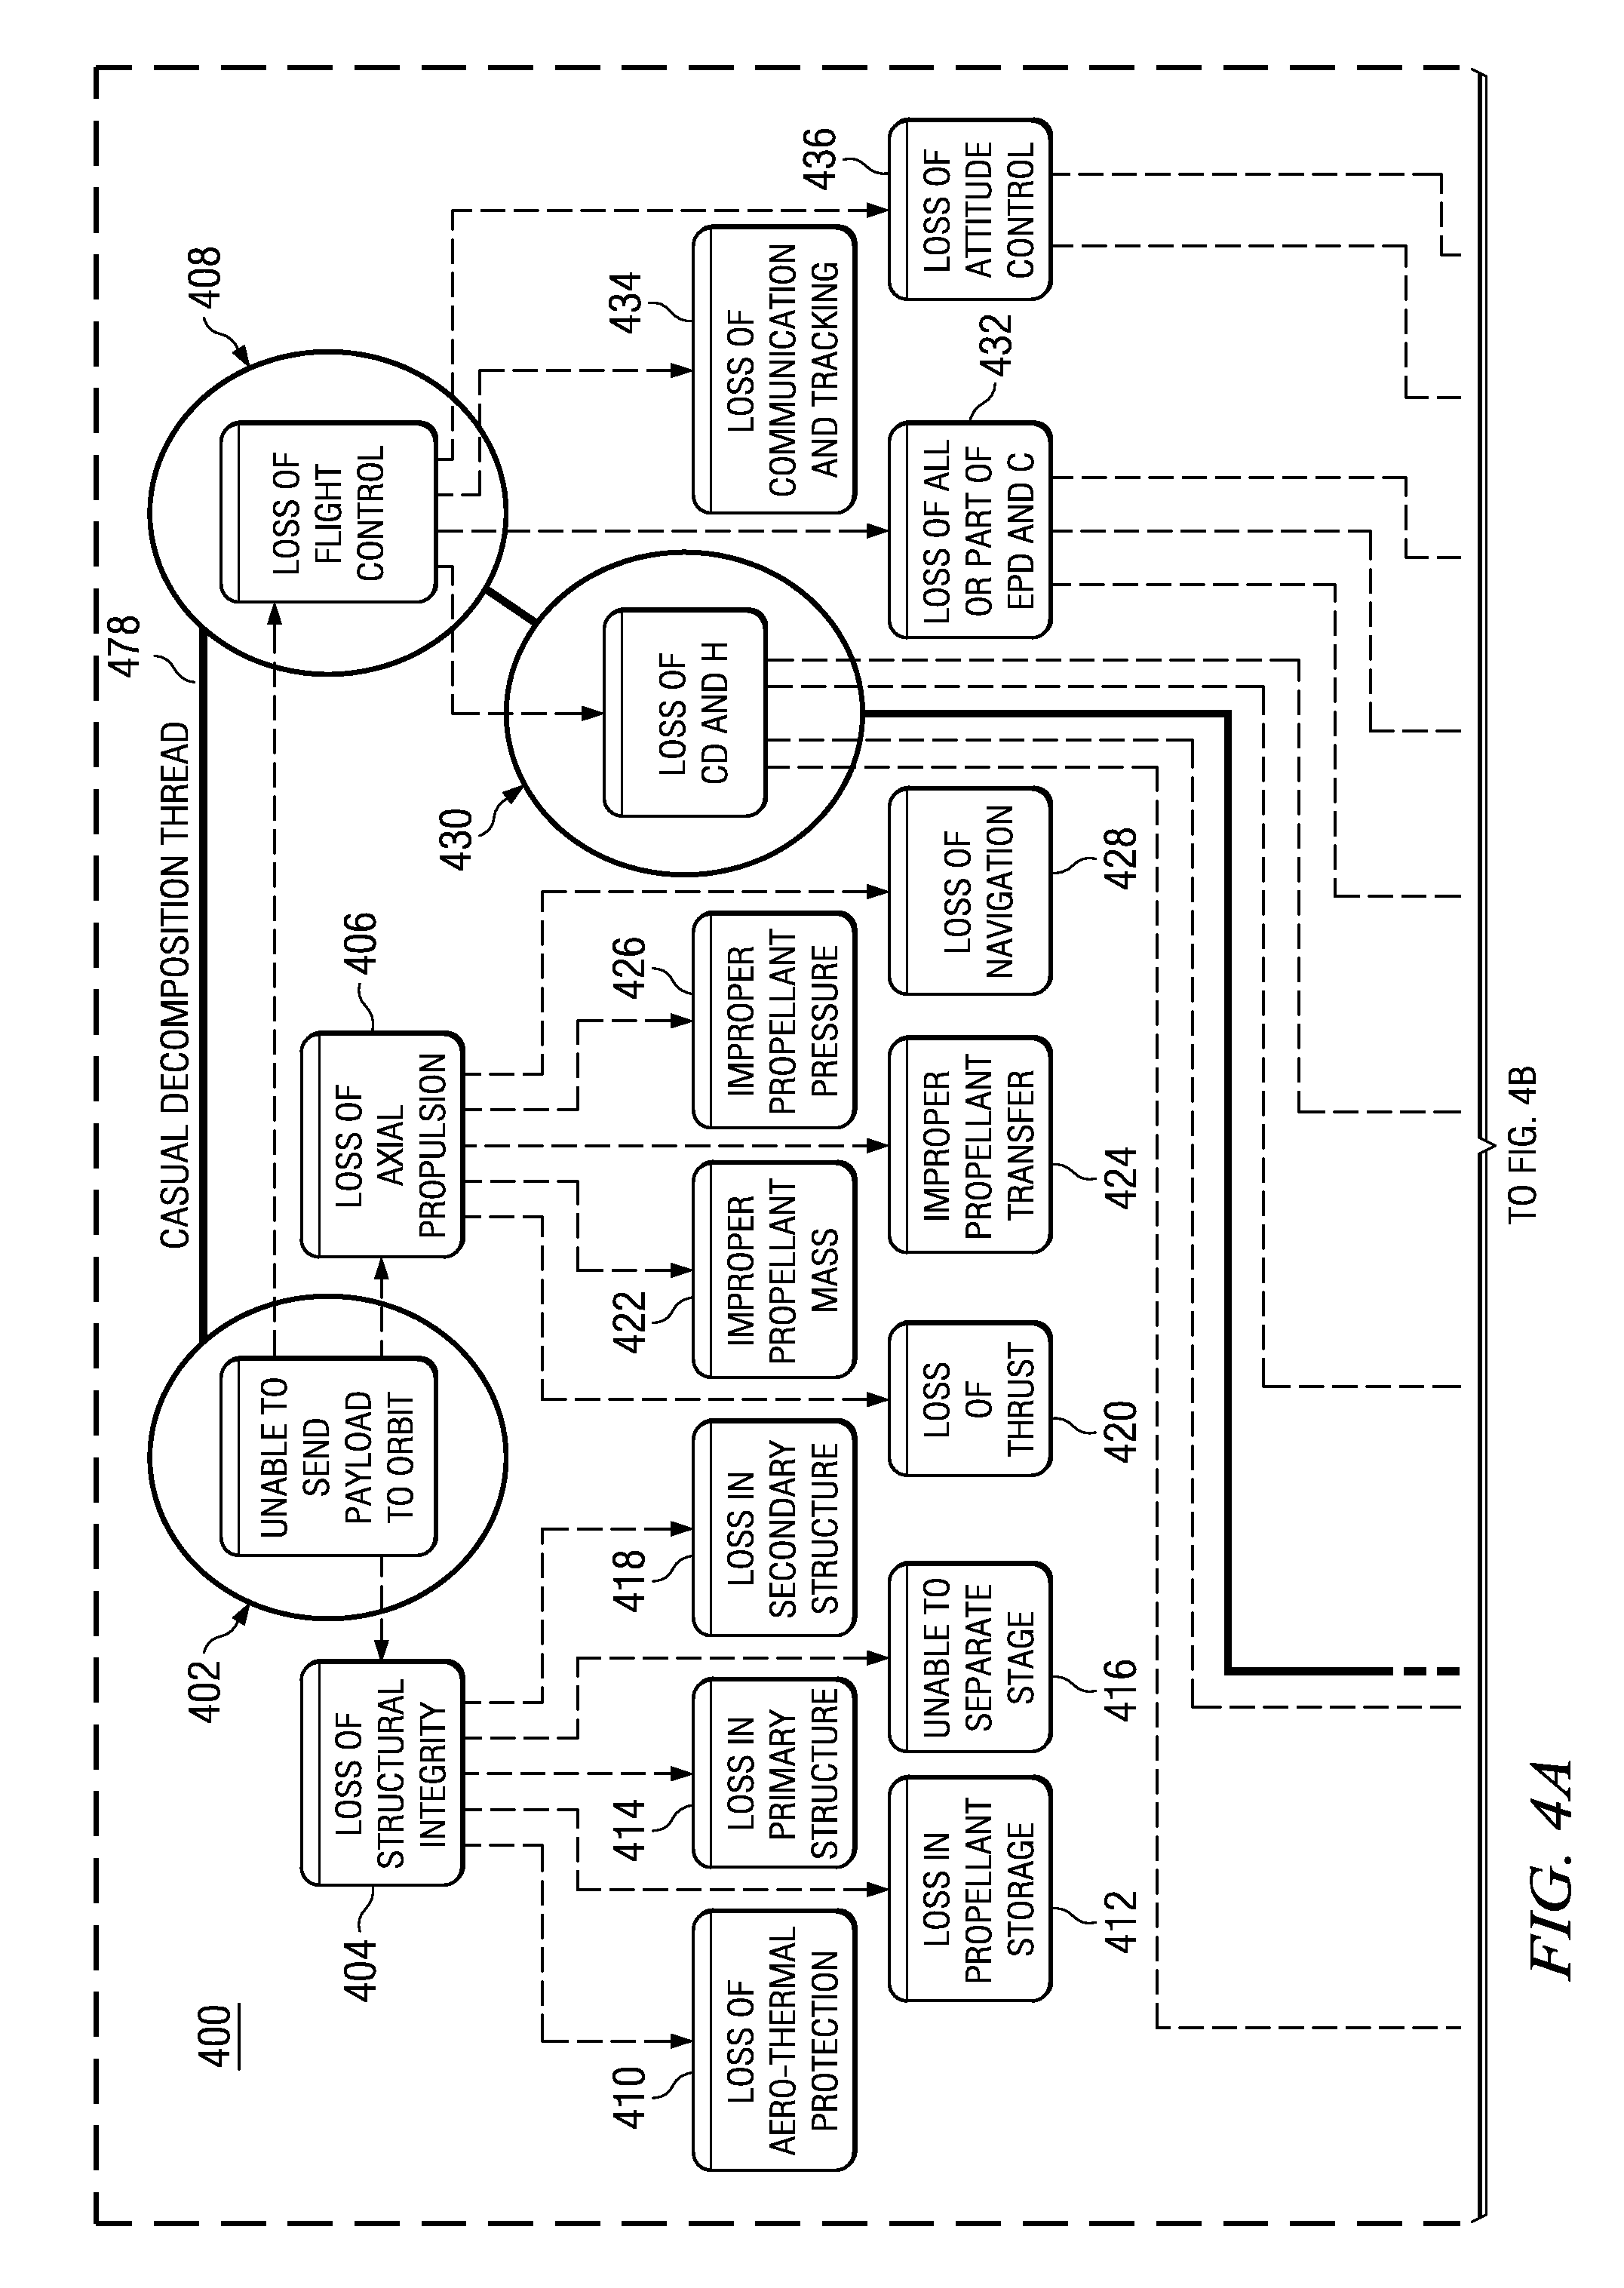 Health monitoring system for preventing a hazardous condition